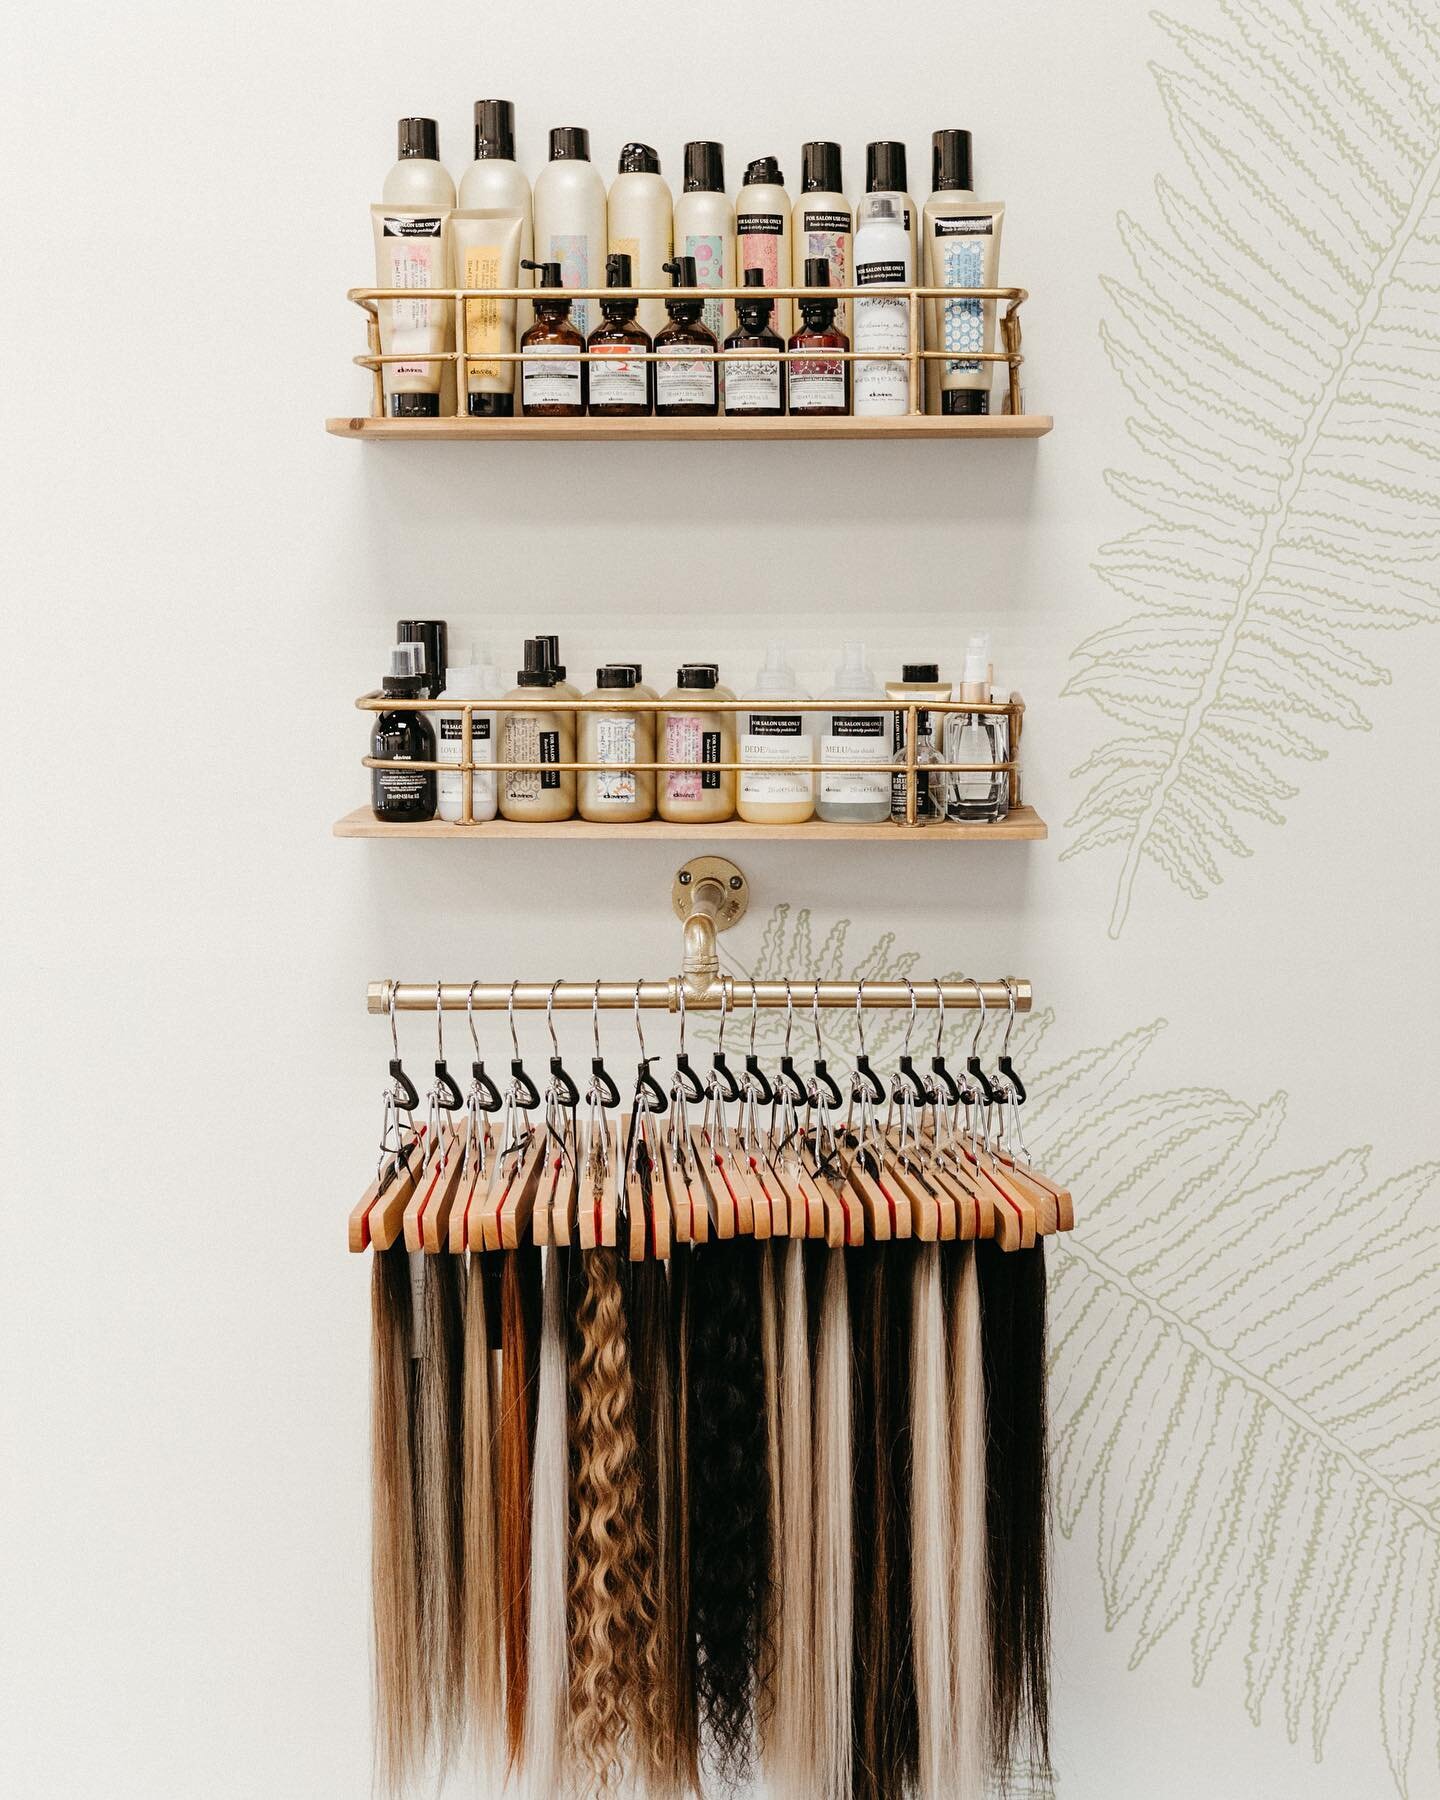 ⁉️Did you know that you can have any @davinesofficial or @getgoldielocks product used on your hair while you are receiving a service at HairColumn? 

We fully stock our backbar so our stylists have the chance to create all looks for any texture, styl